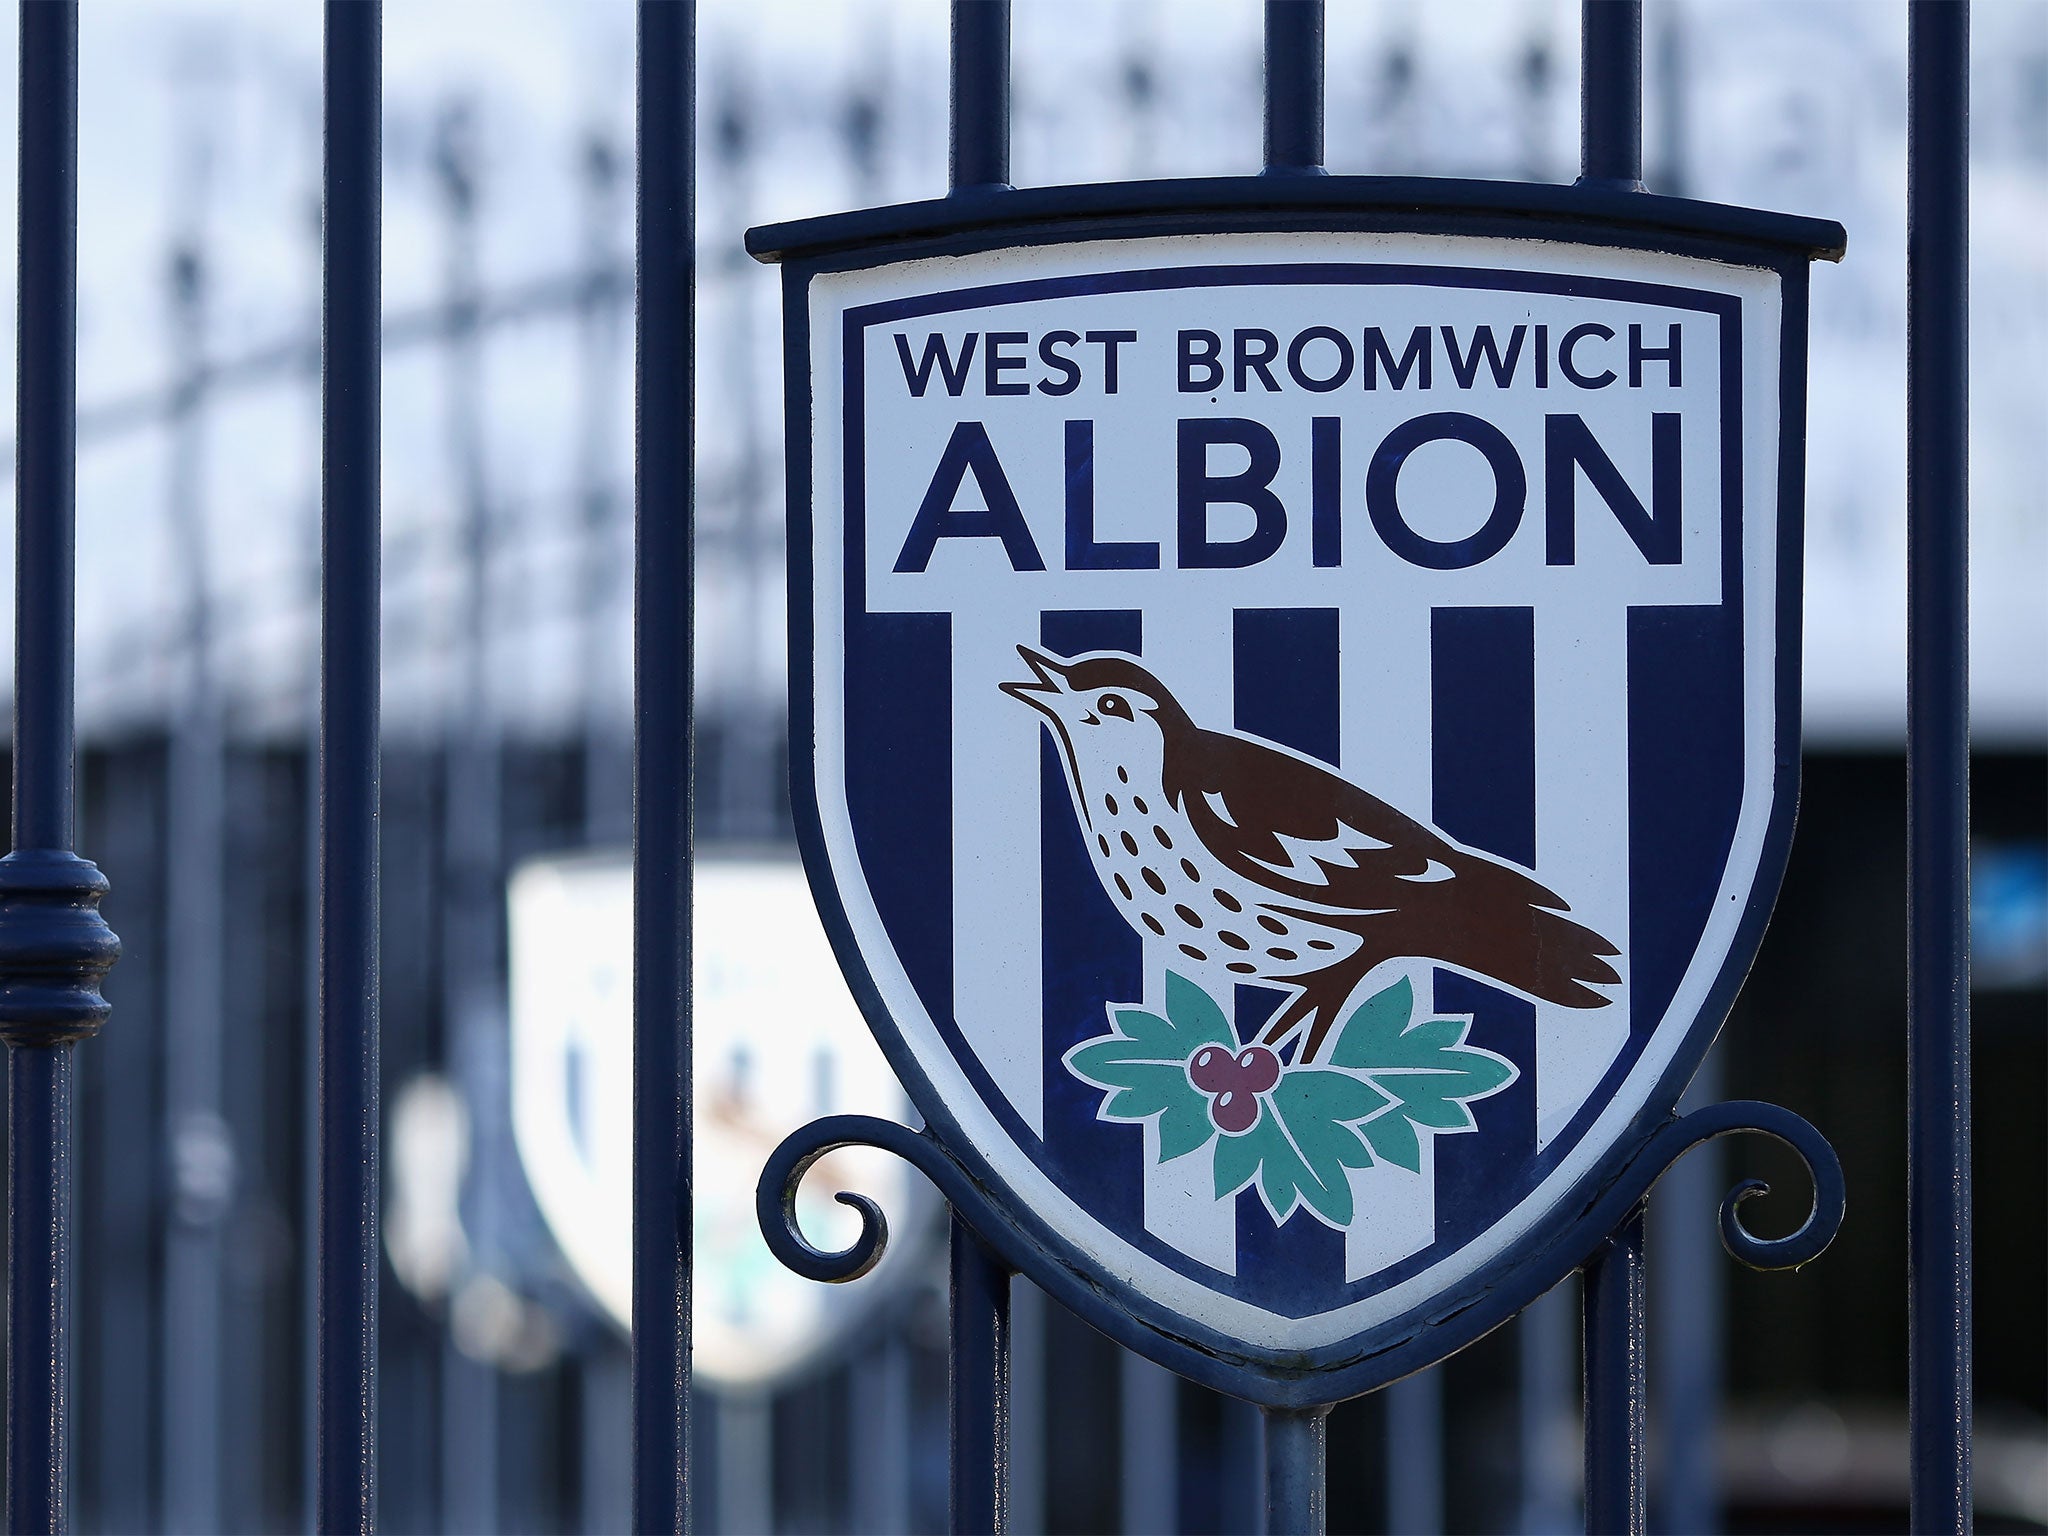 West Brom are slipping towards relegation